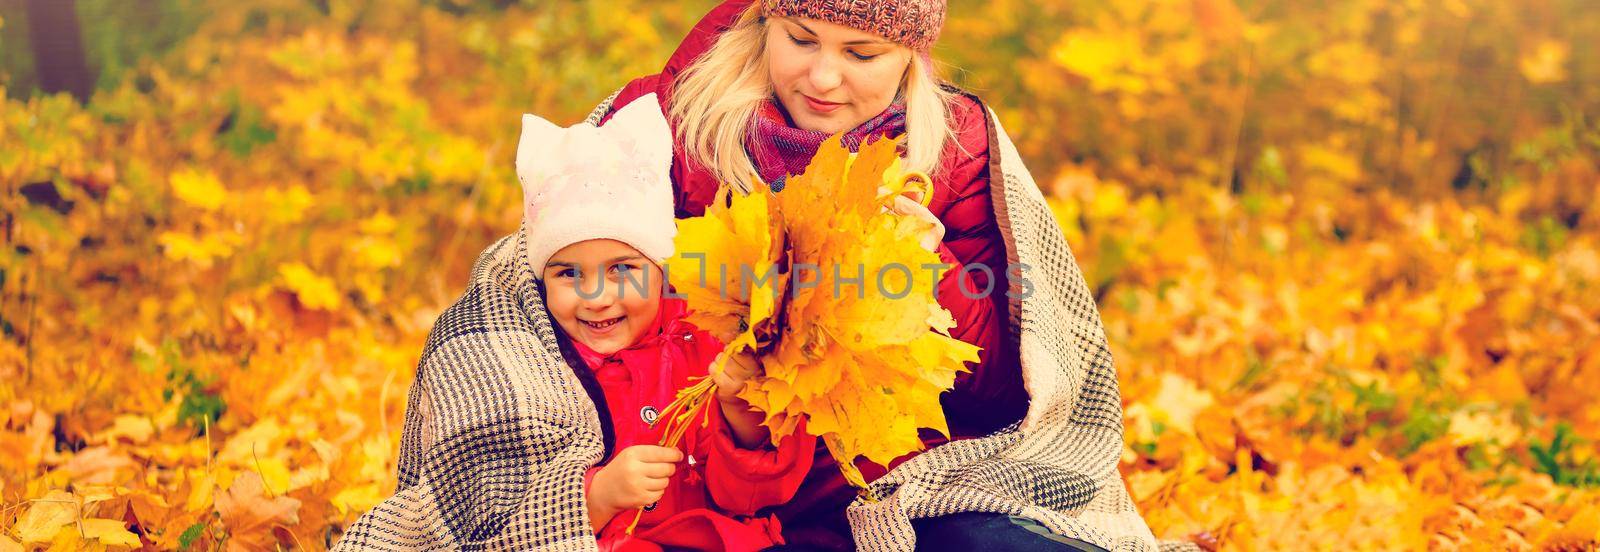 Mother and child hands in the autumn park in the middle of the orange fallen leaves by Andelov13